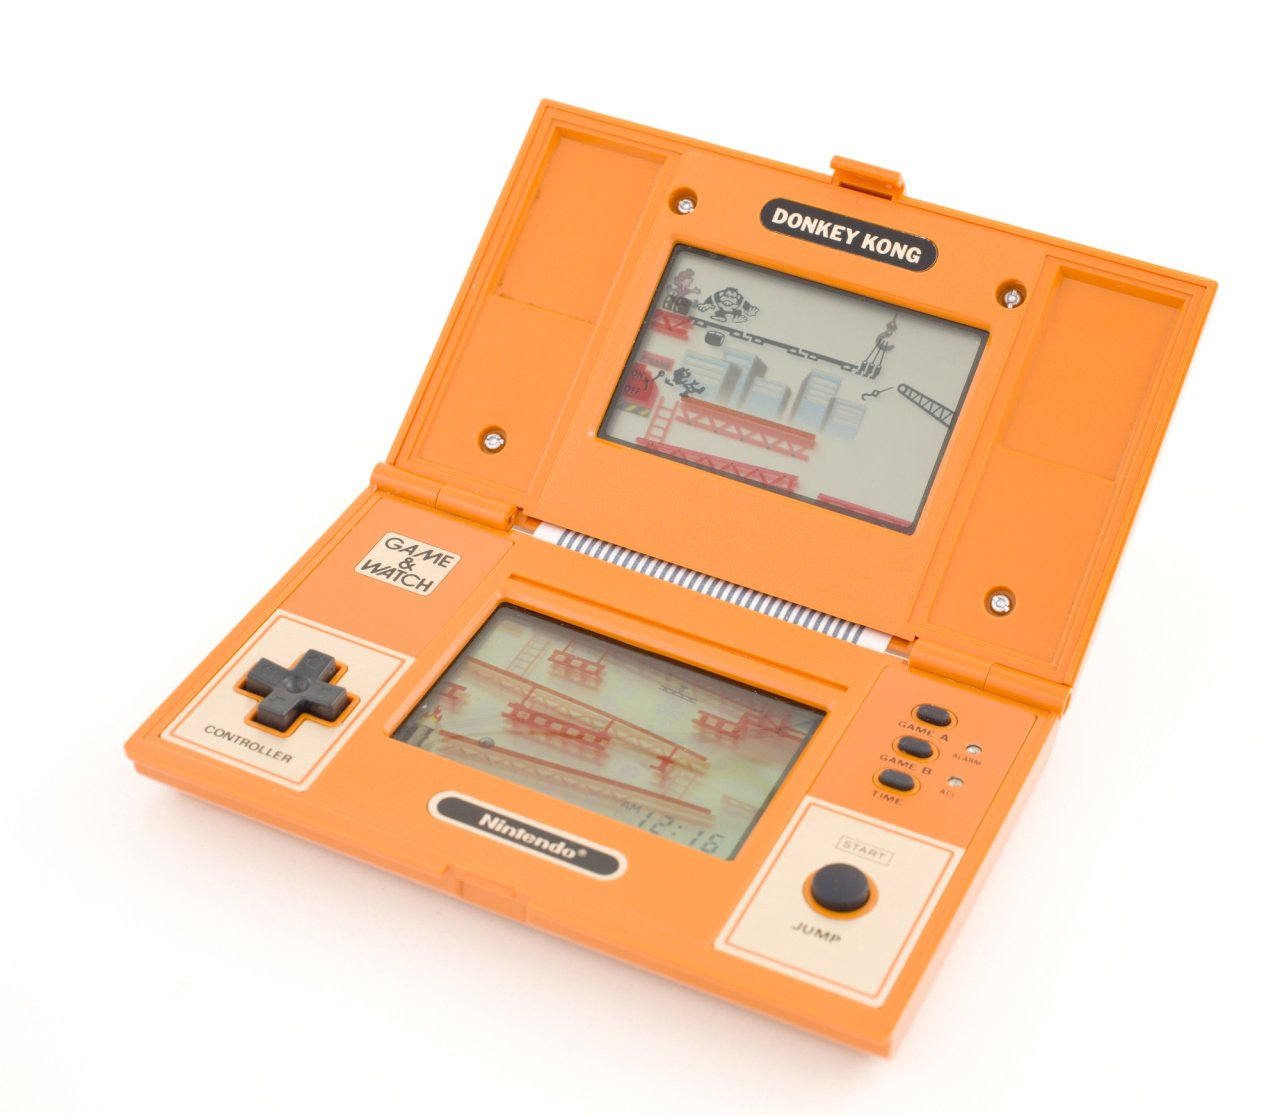 Nintendo Game and Watch: The Most Important Video Game Tech Ever